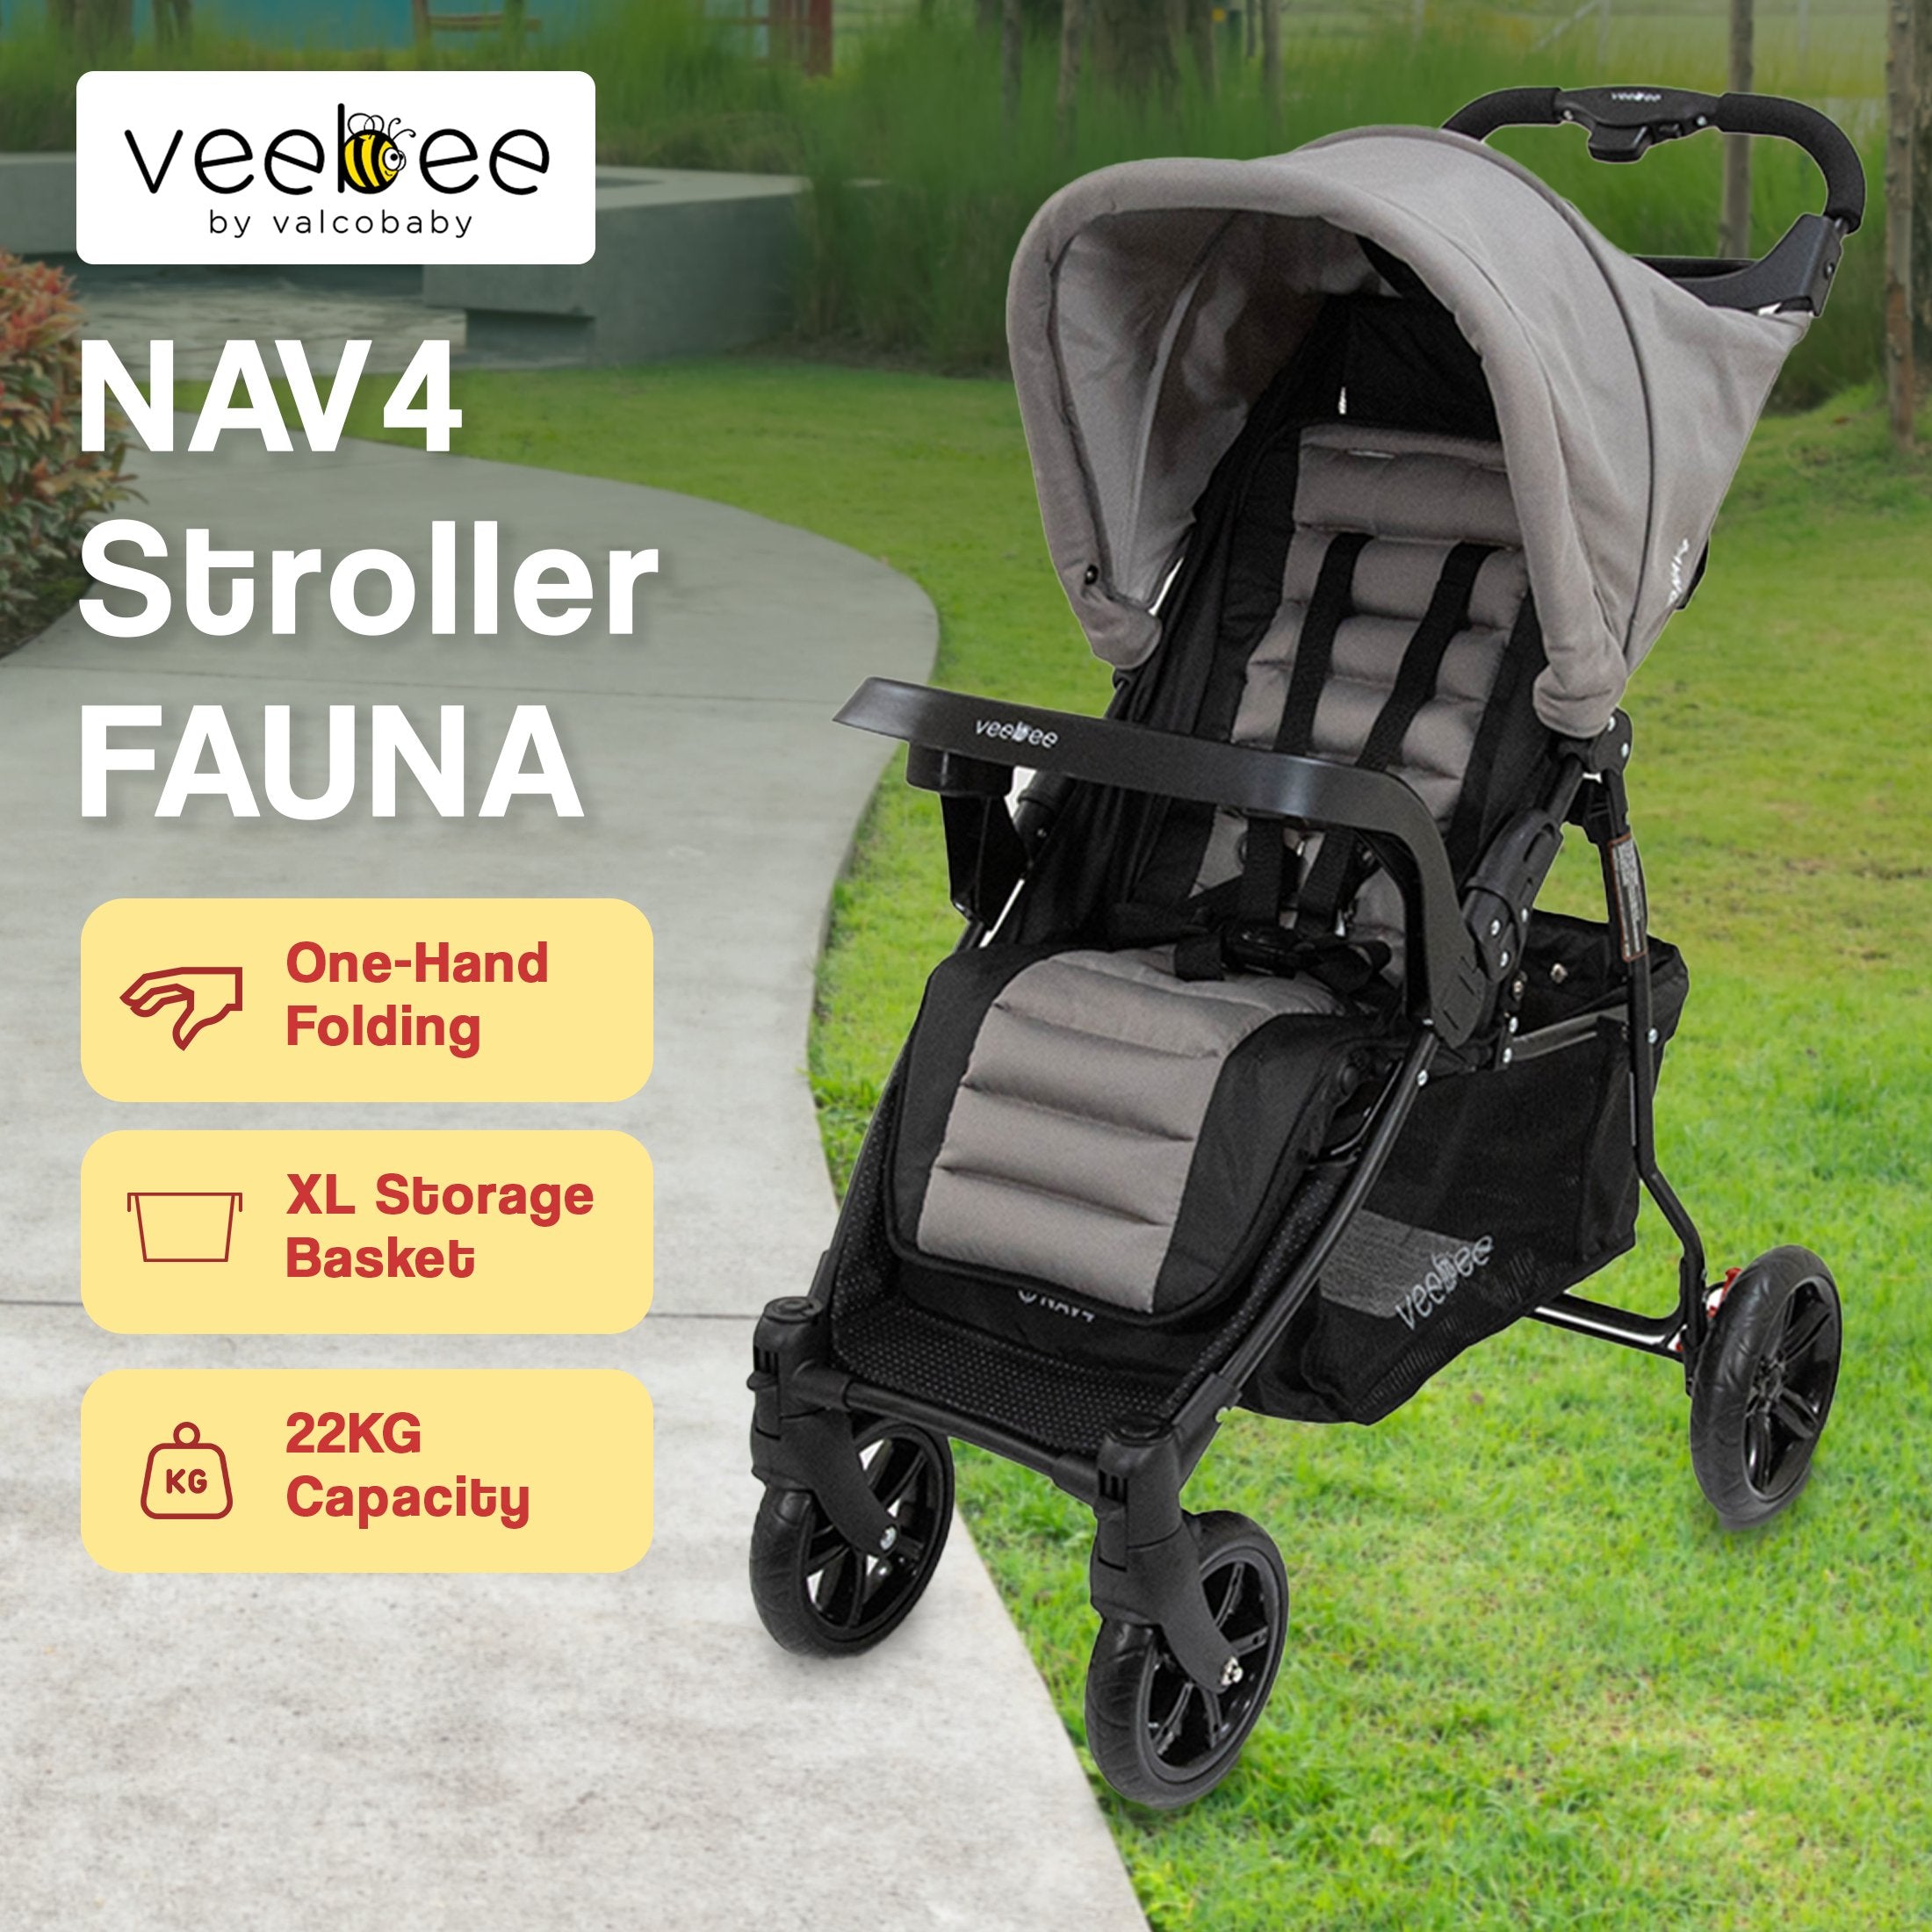 Veebee Nav 4 Stroller Fauna in stylish black and grey  colour with hood and carry basket 22kg capacity with a lawn and concrete path background.